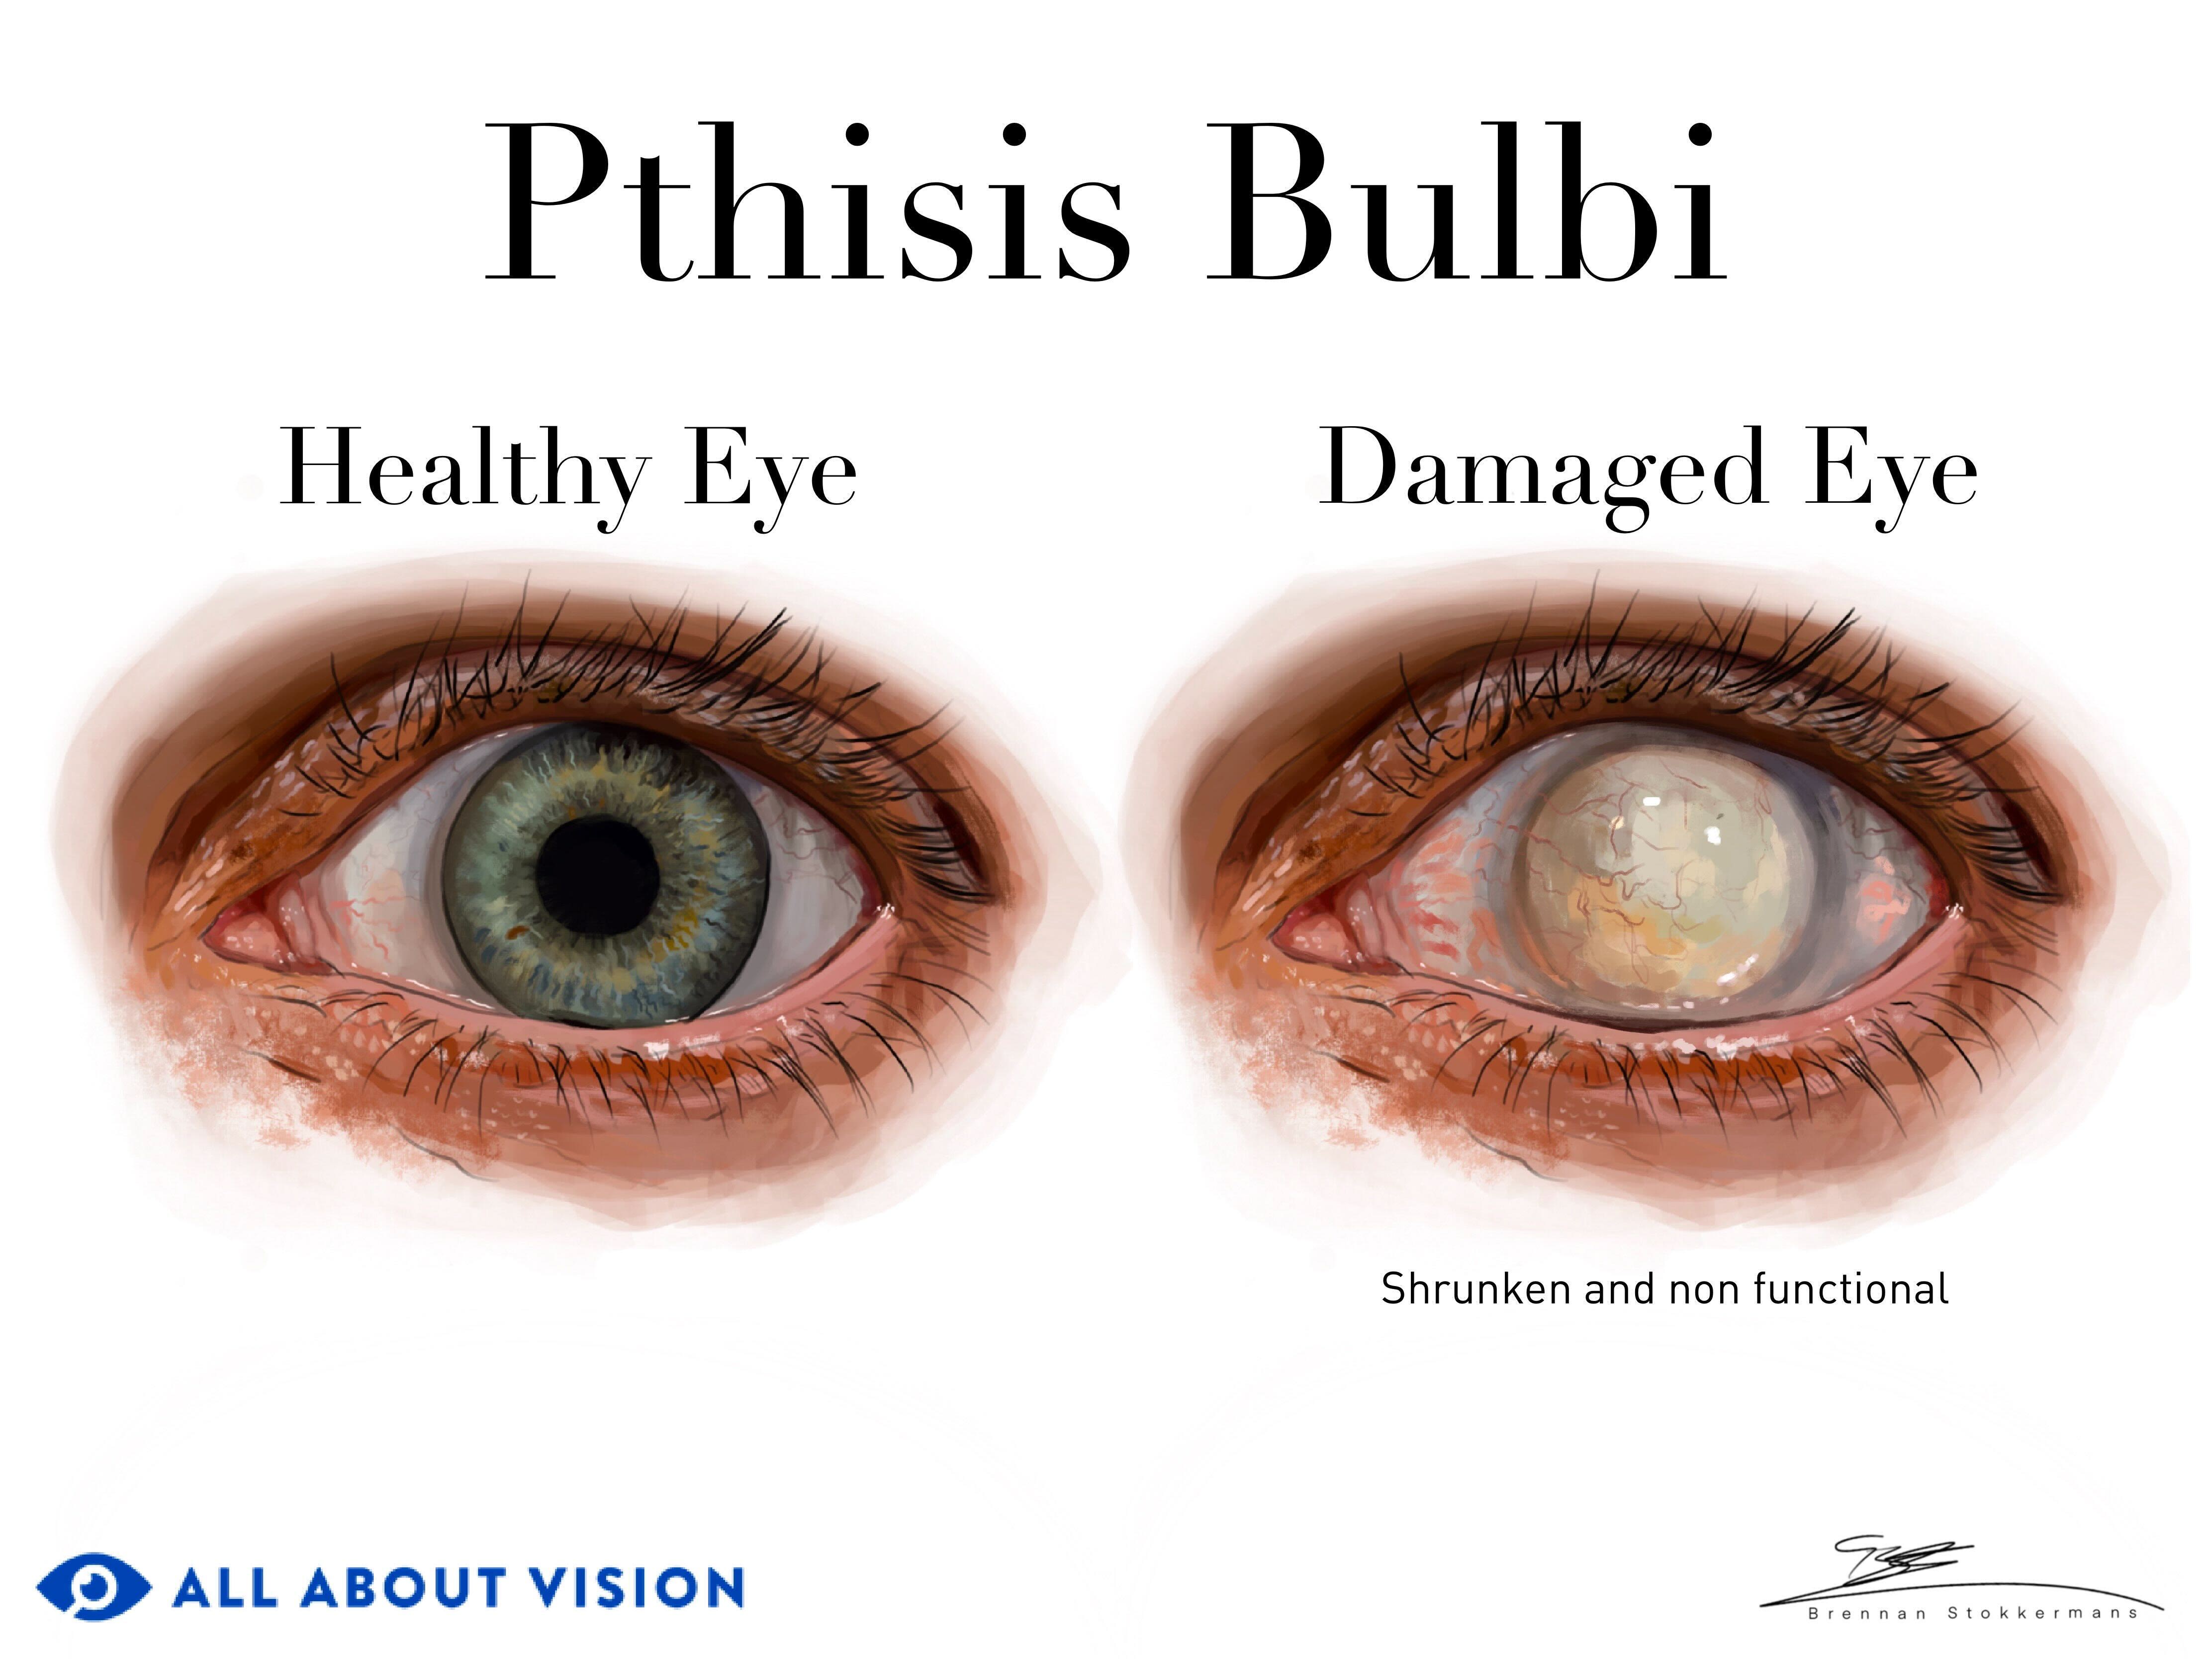 Phthisis bulbi occurs when damage to the eye causes it to completely stop working.